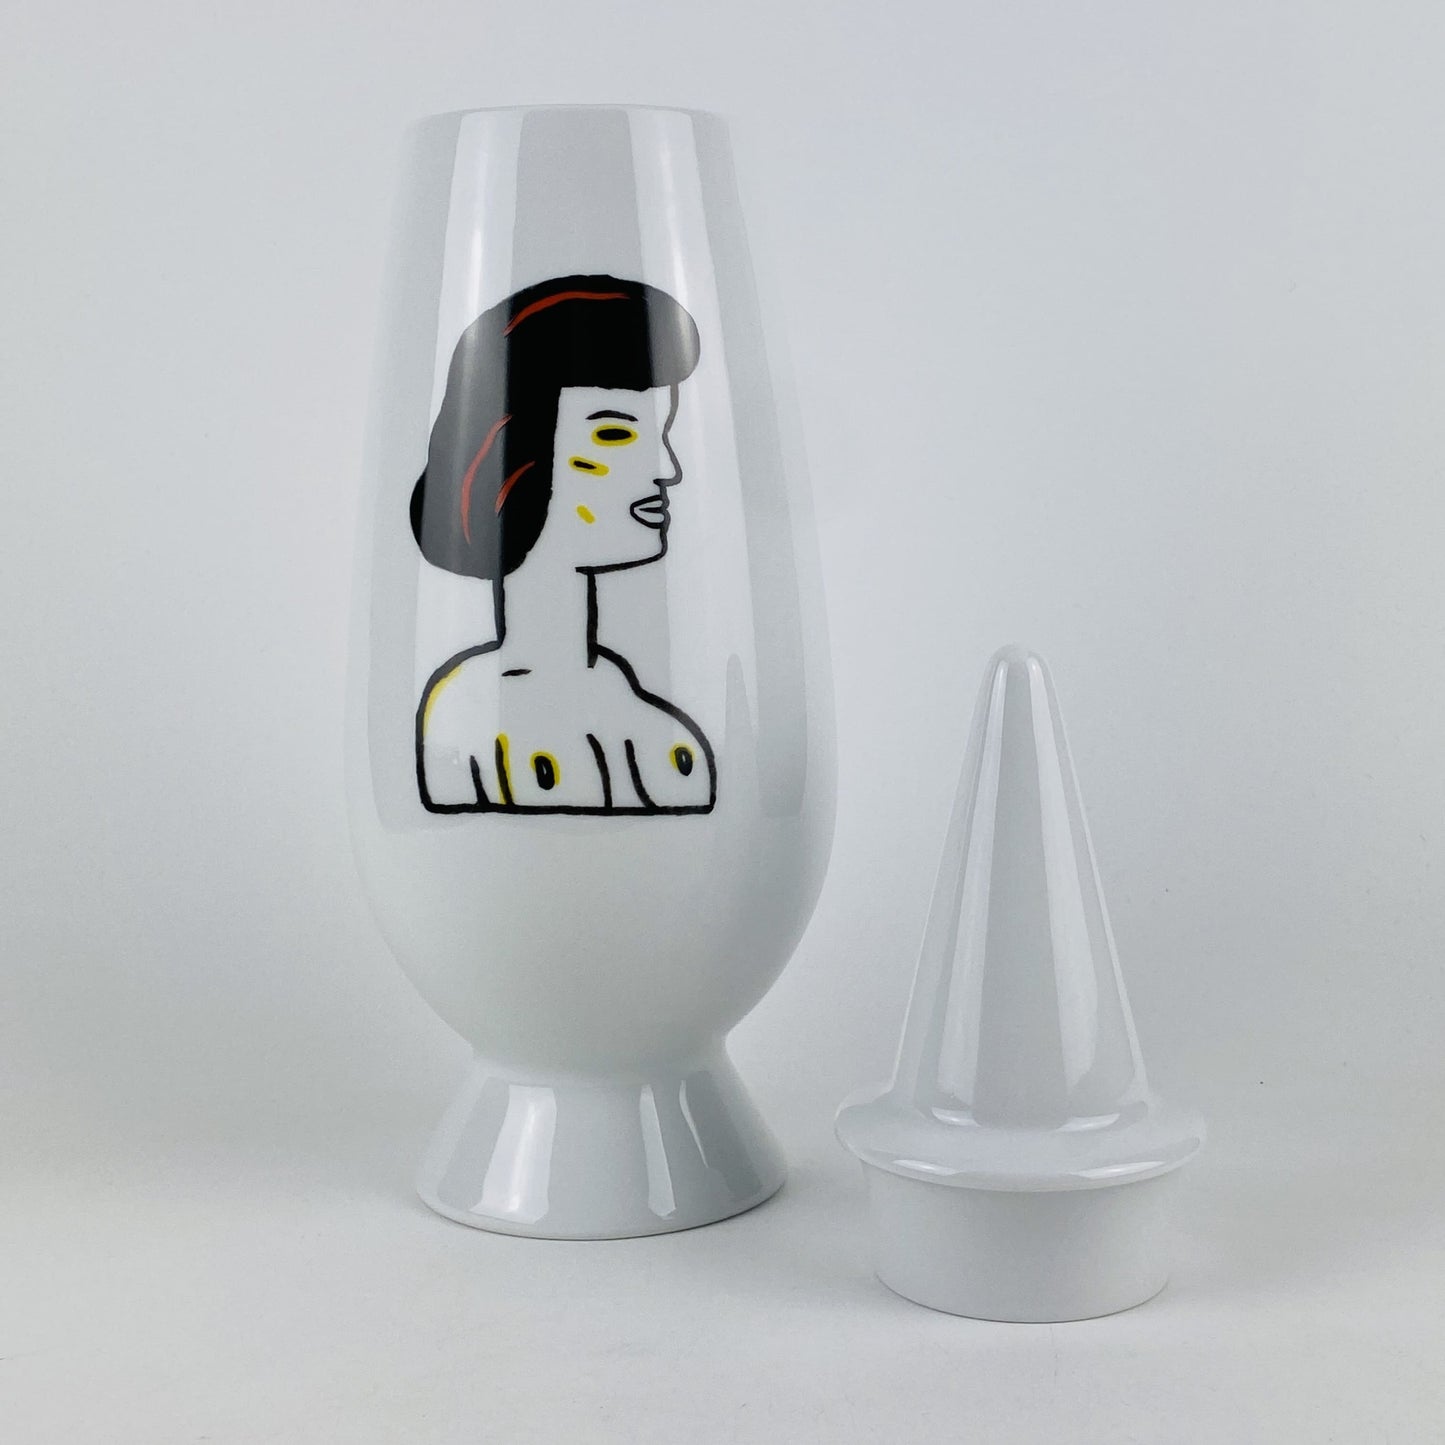 Alessi Tendentse Vase by Guillermo Tejeda for Alessandro Mendini 100% Make-up series - No. 83